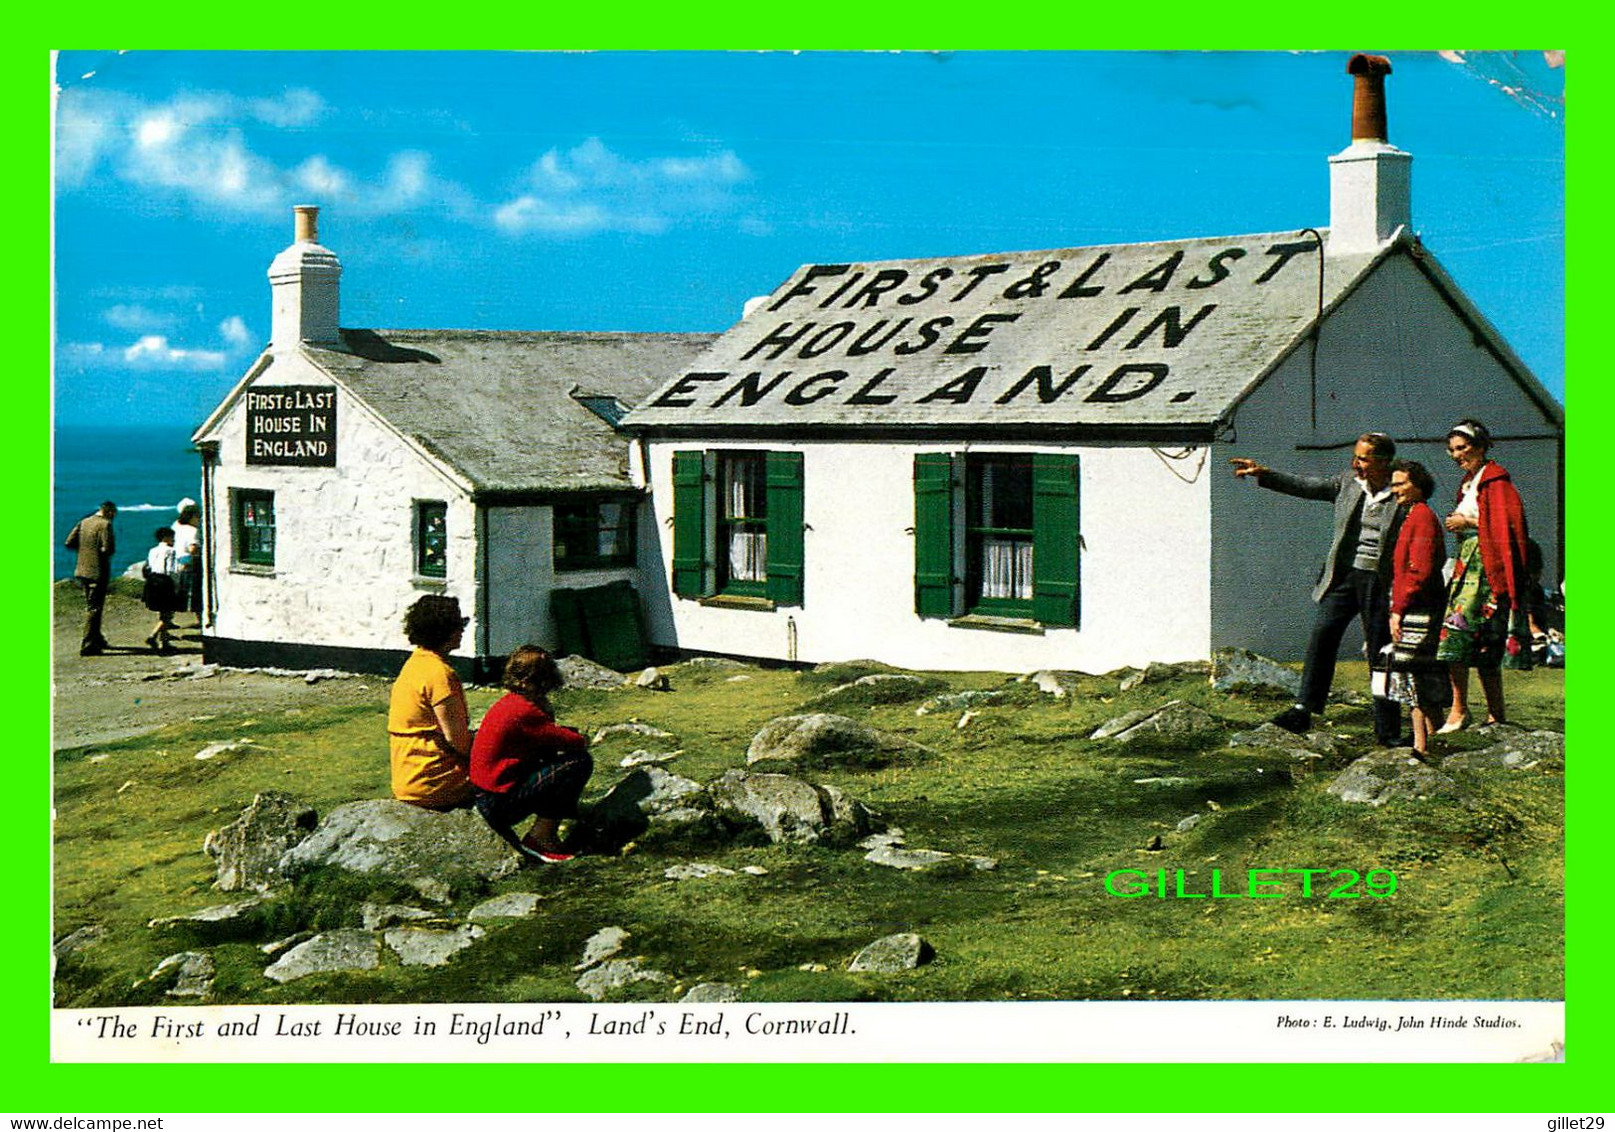 LAND' END, UK - THE FIRST AND LAST HOUSE IN ENGLAND - PHOTO E. LUDWIG - TRAVEL - JOHN HINDE ORIGINAL - - Land's End